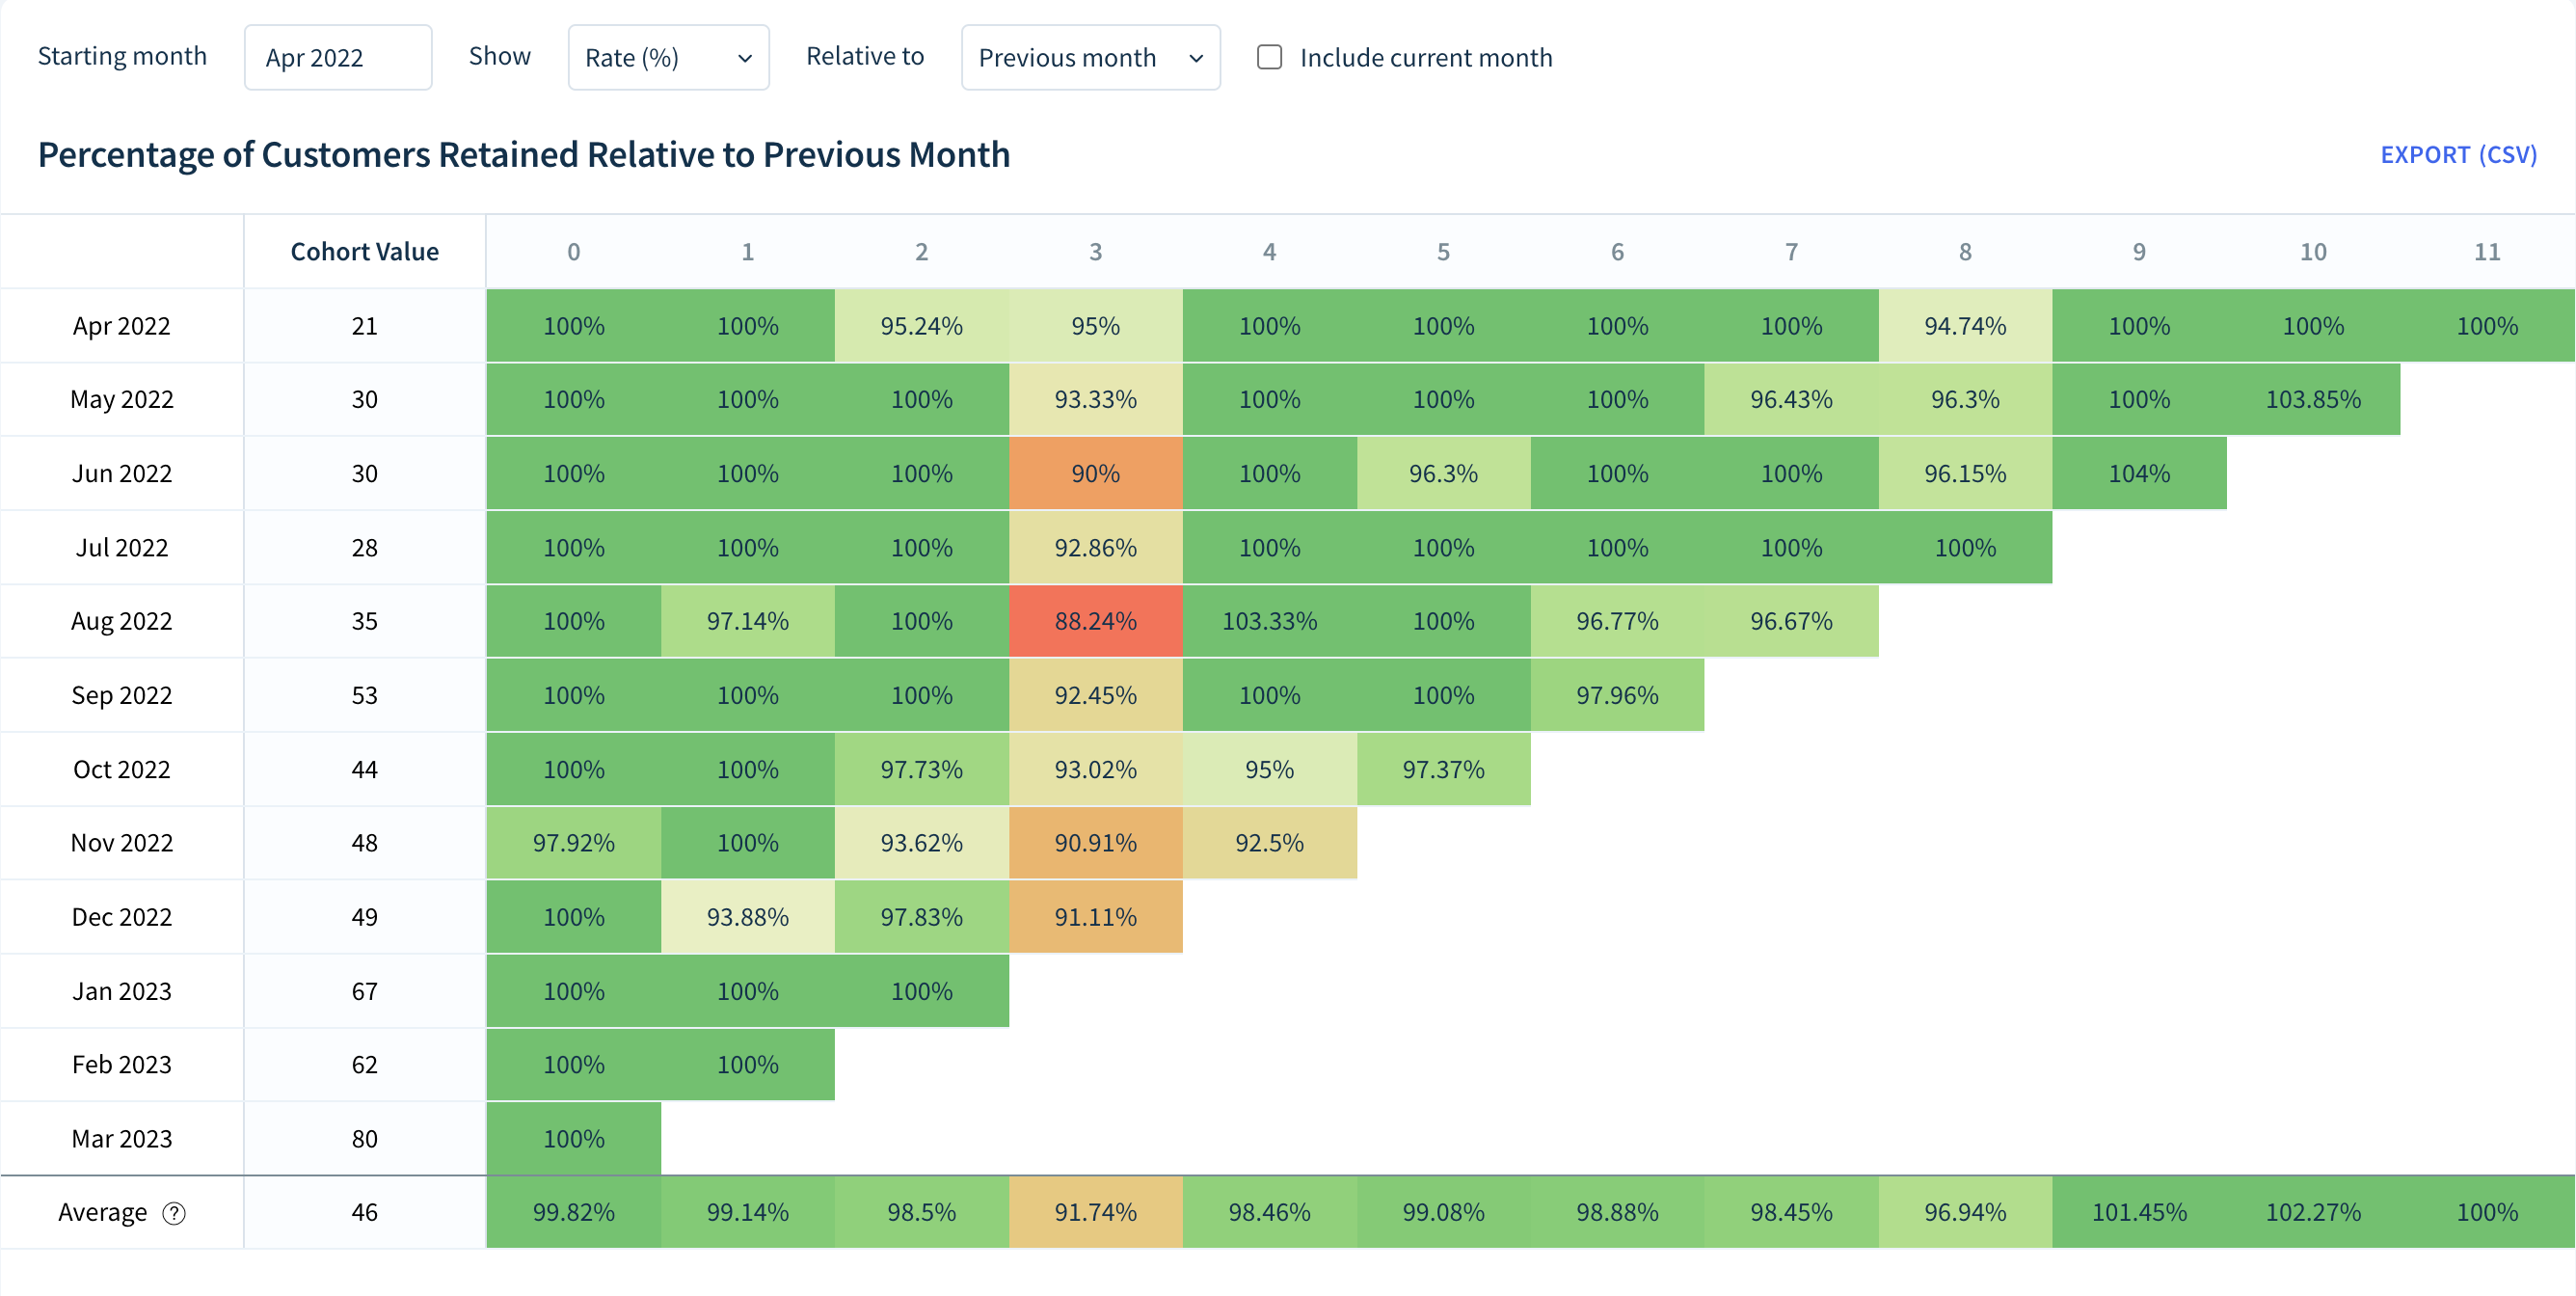 ChartMogul Chart: Percentage of Customers Retained Relative to Previous Month